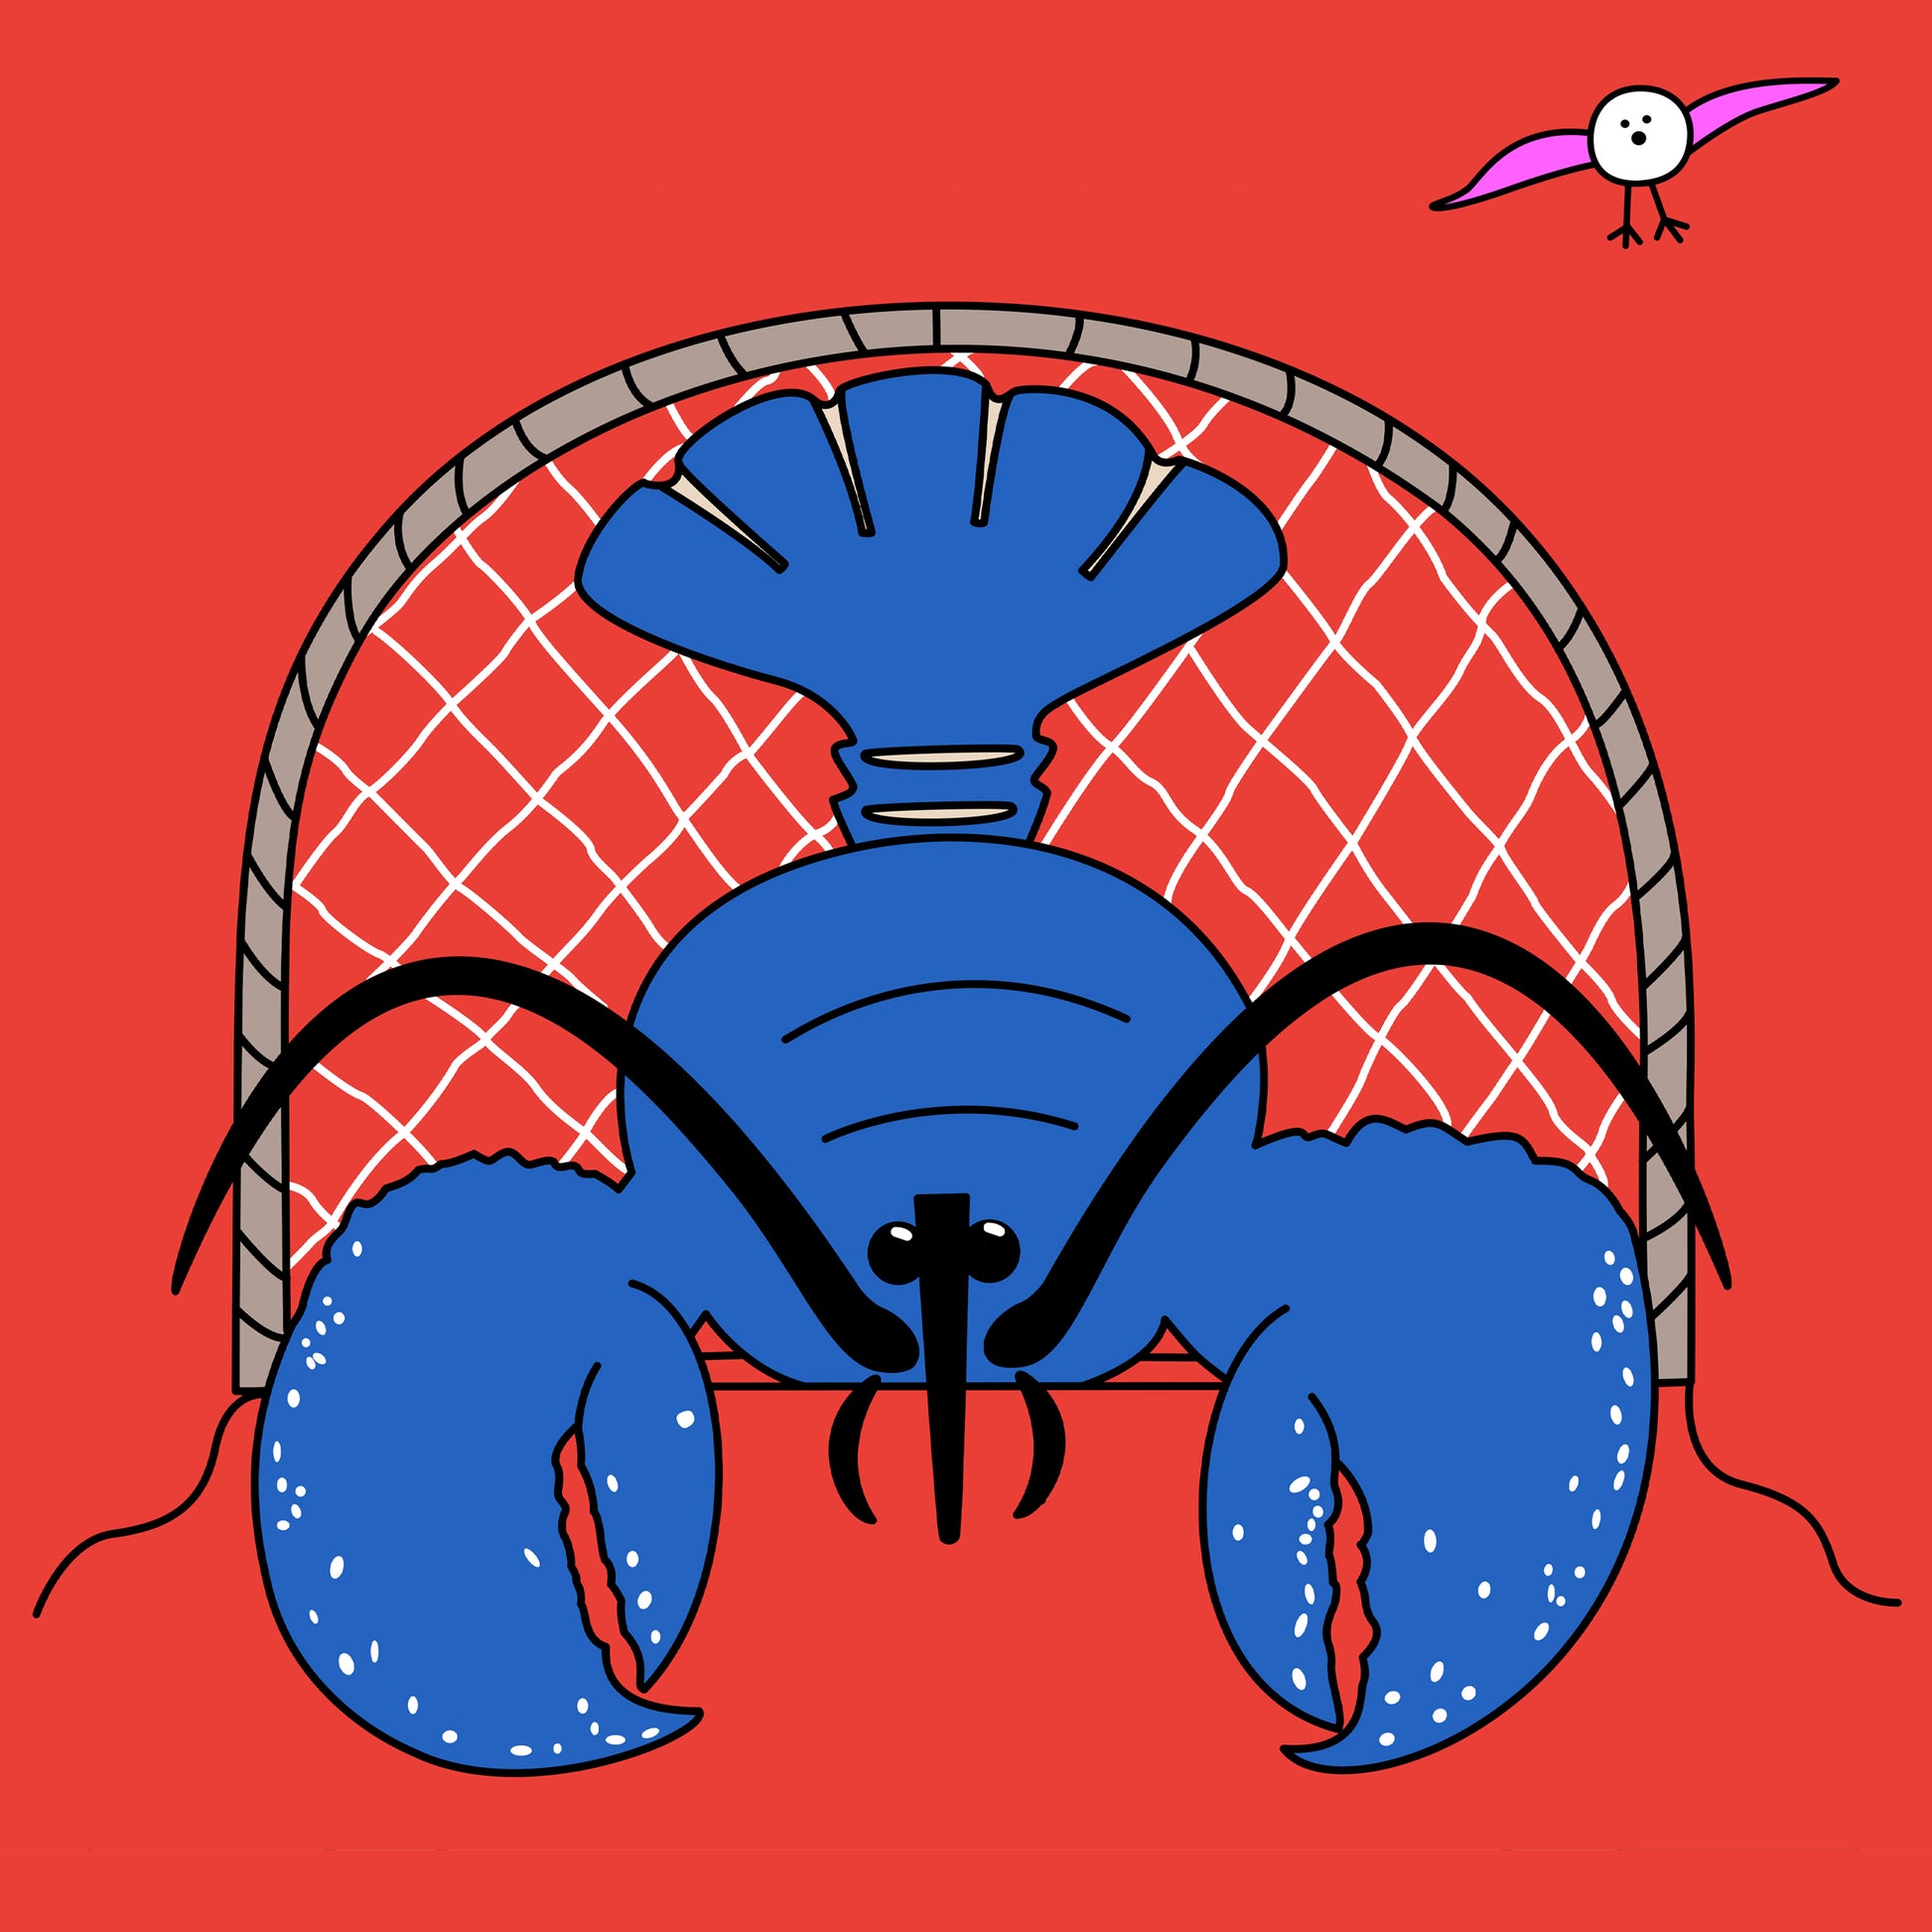 A blue lobster is facing forward in a lobster pot with a bright red background. In the top right corner is a pink winged seagull in flight.